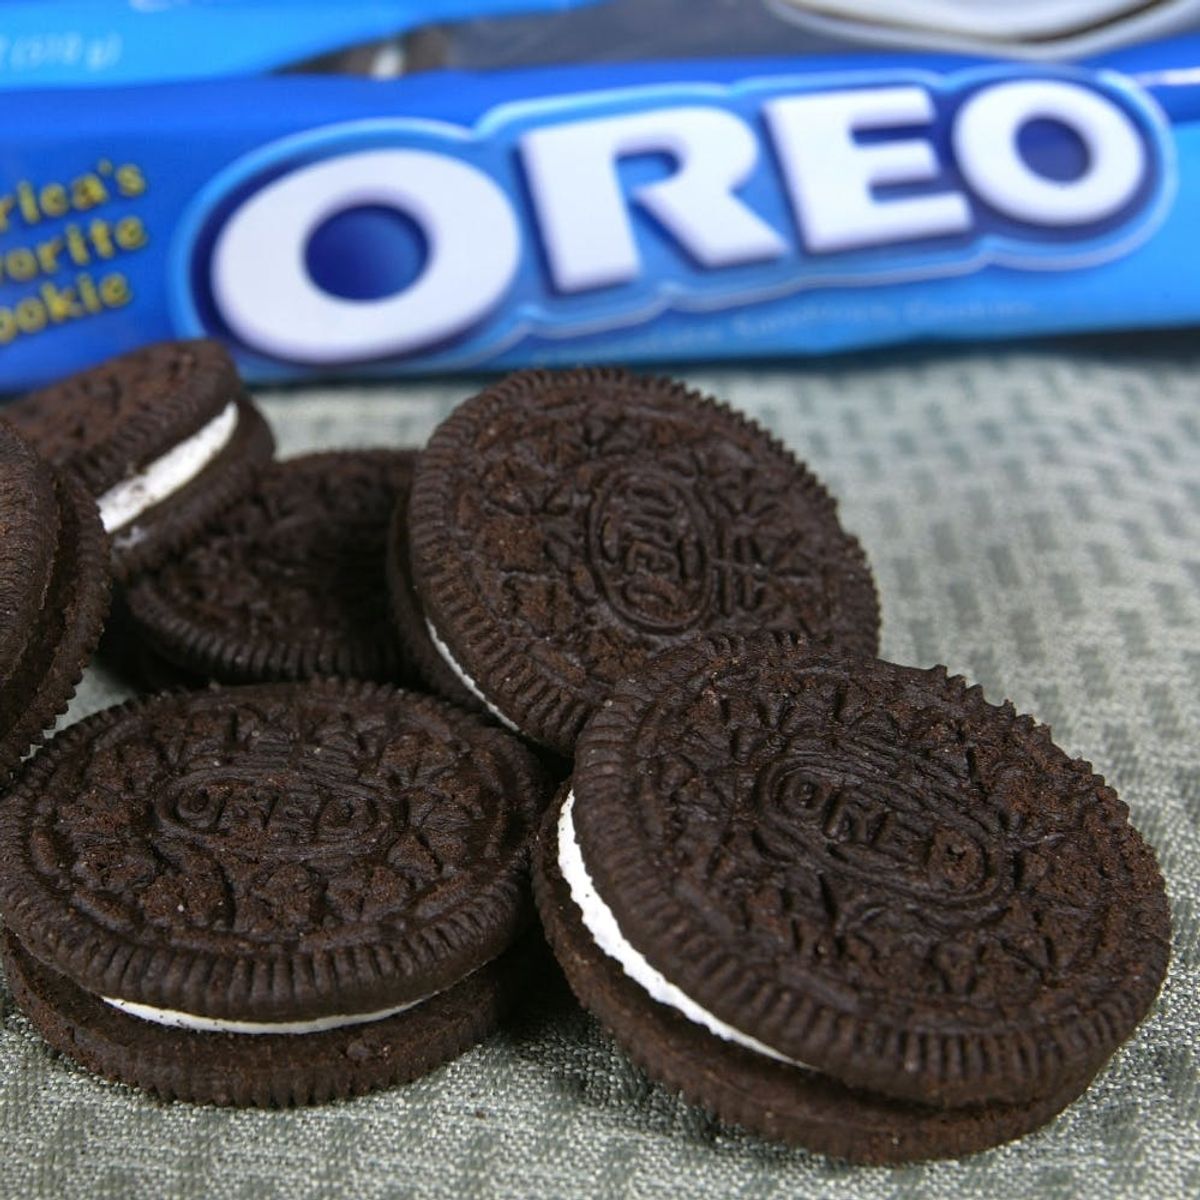 YOU Could Win $500,000 for Coming Up With the New Oreo Flavor